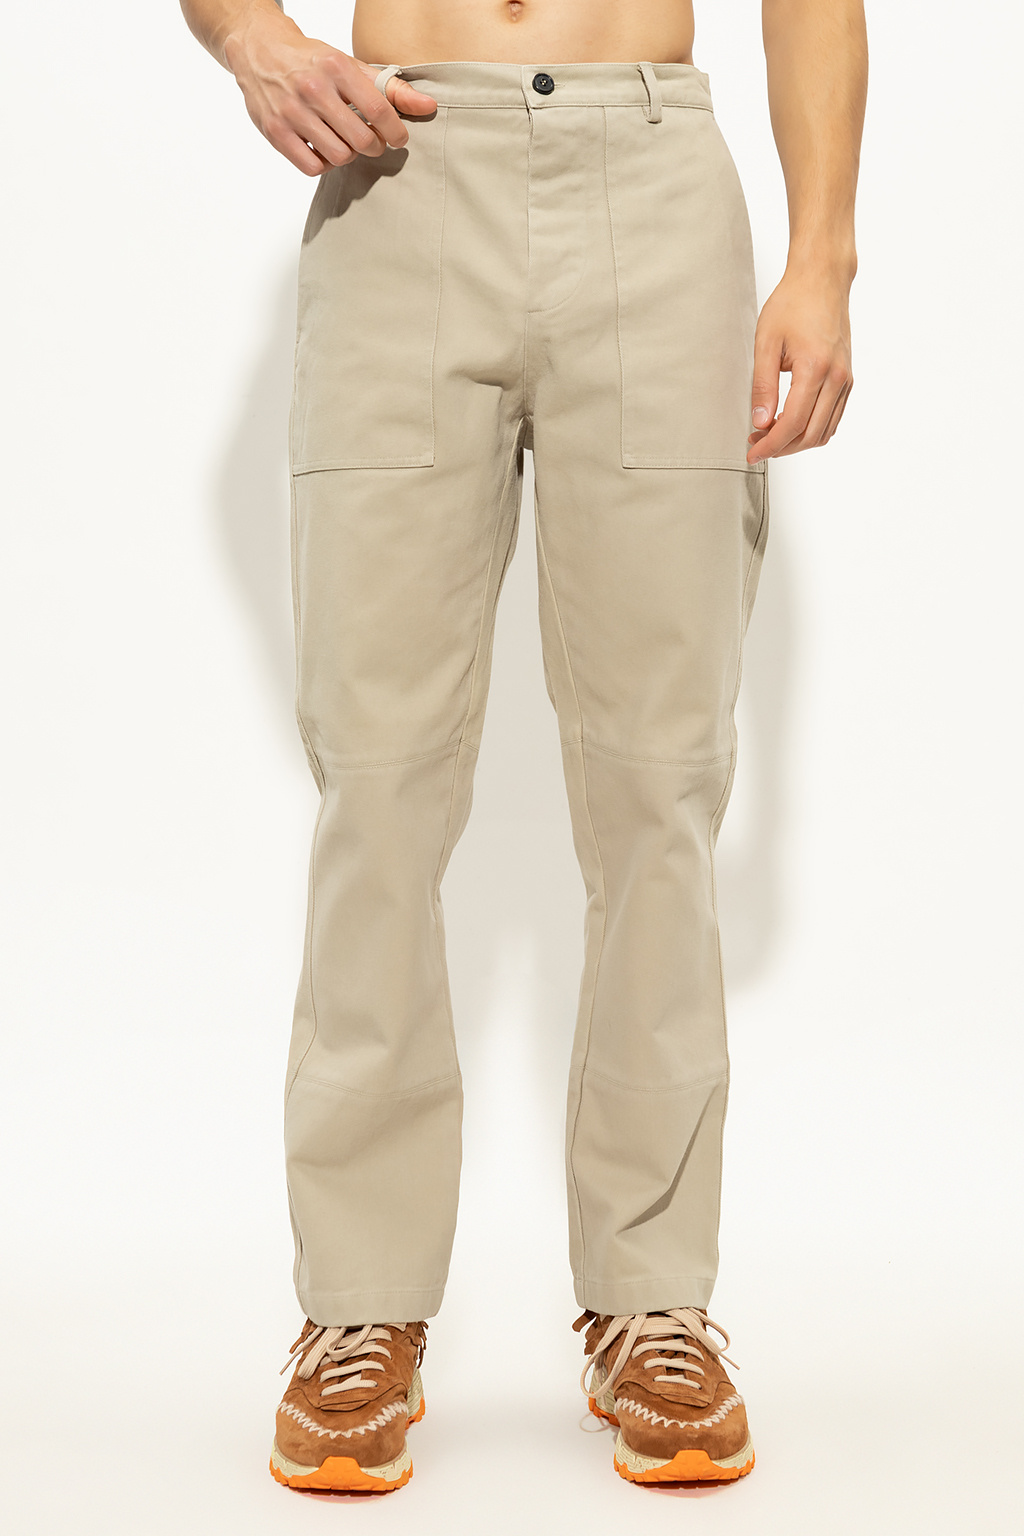 Nick Fouquet Trousers with pockets